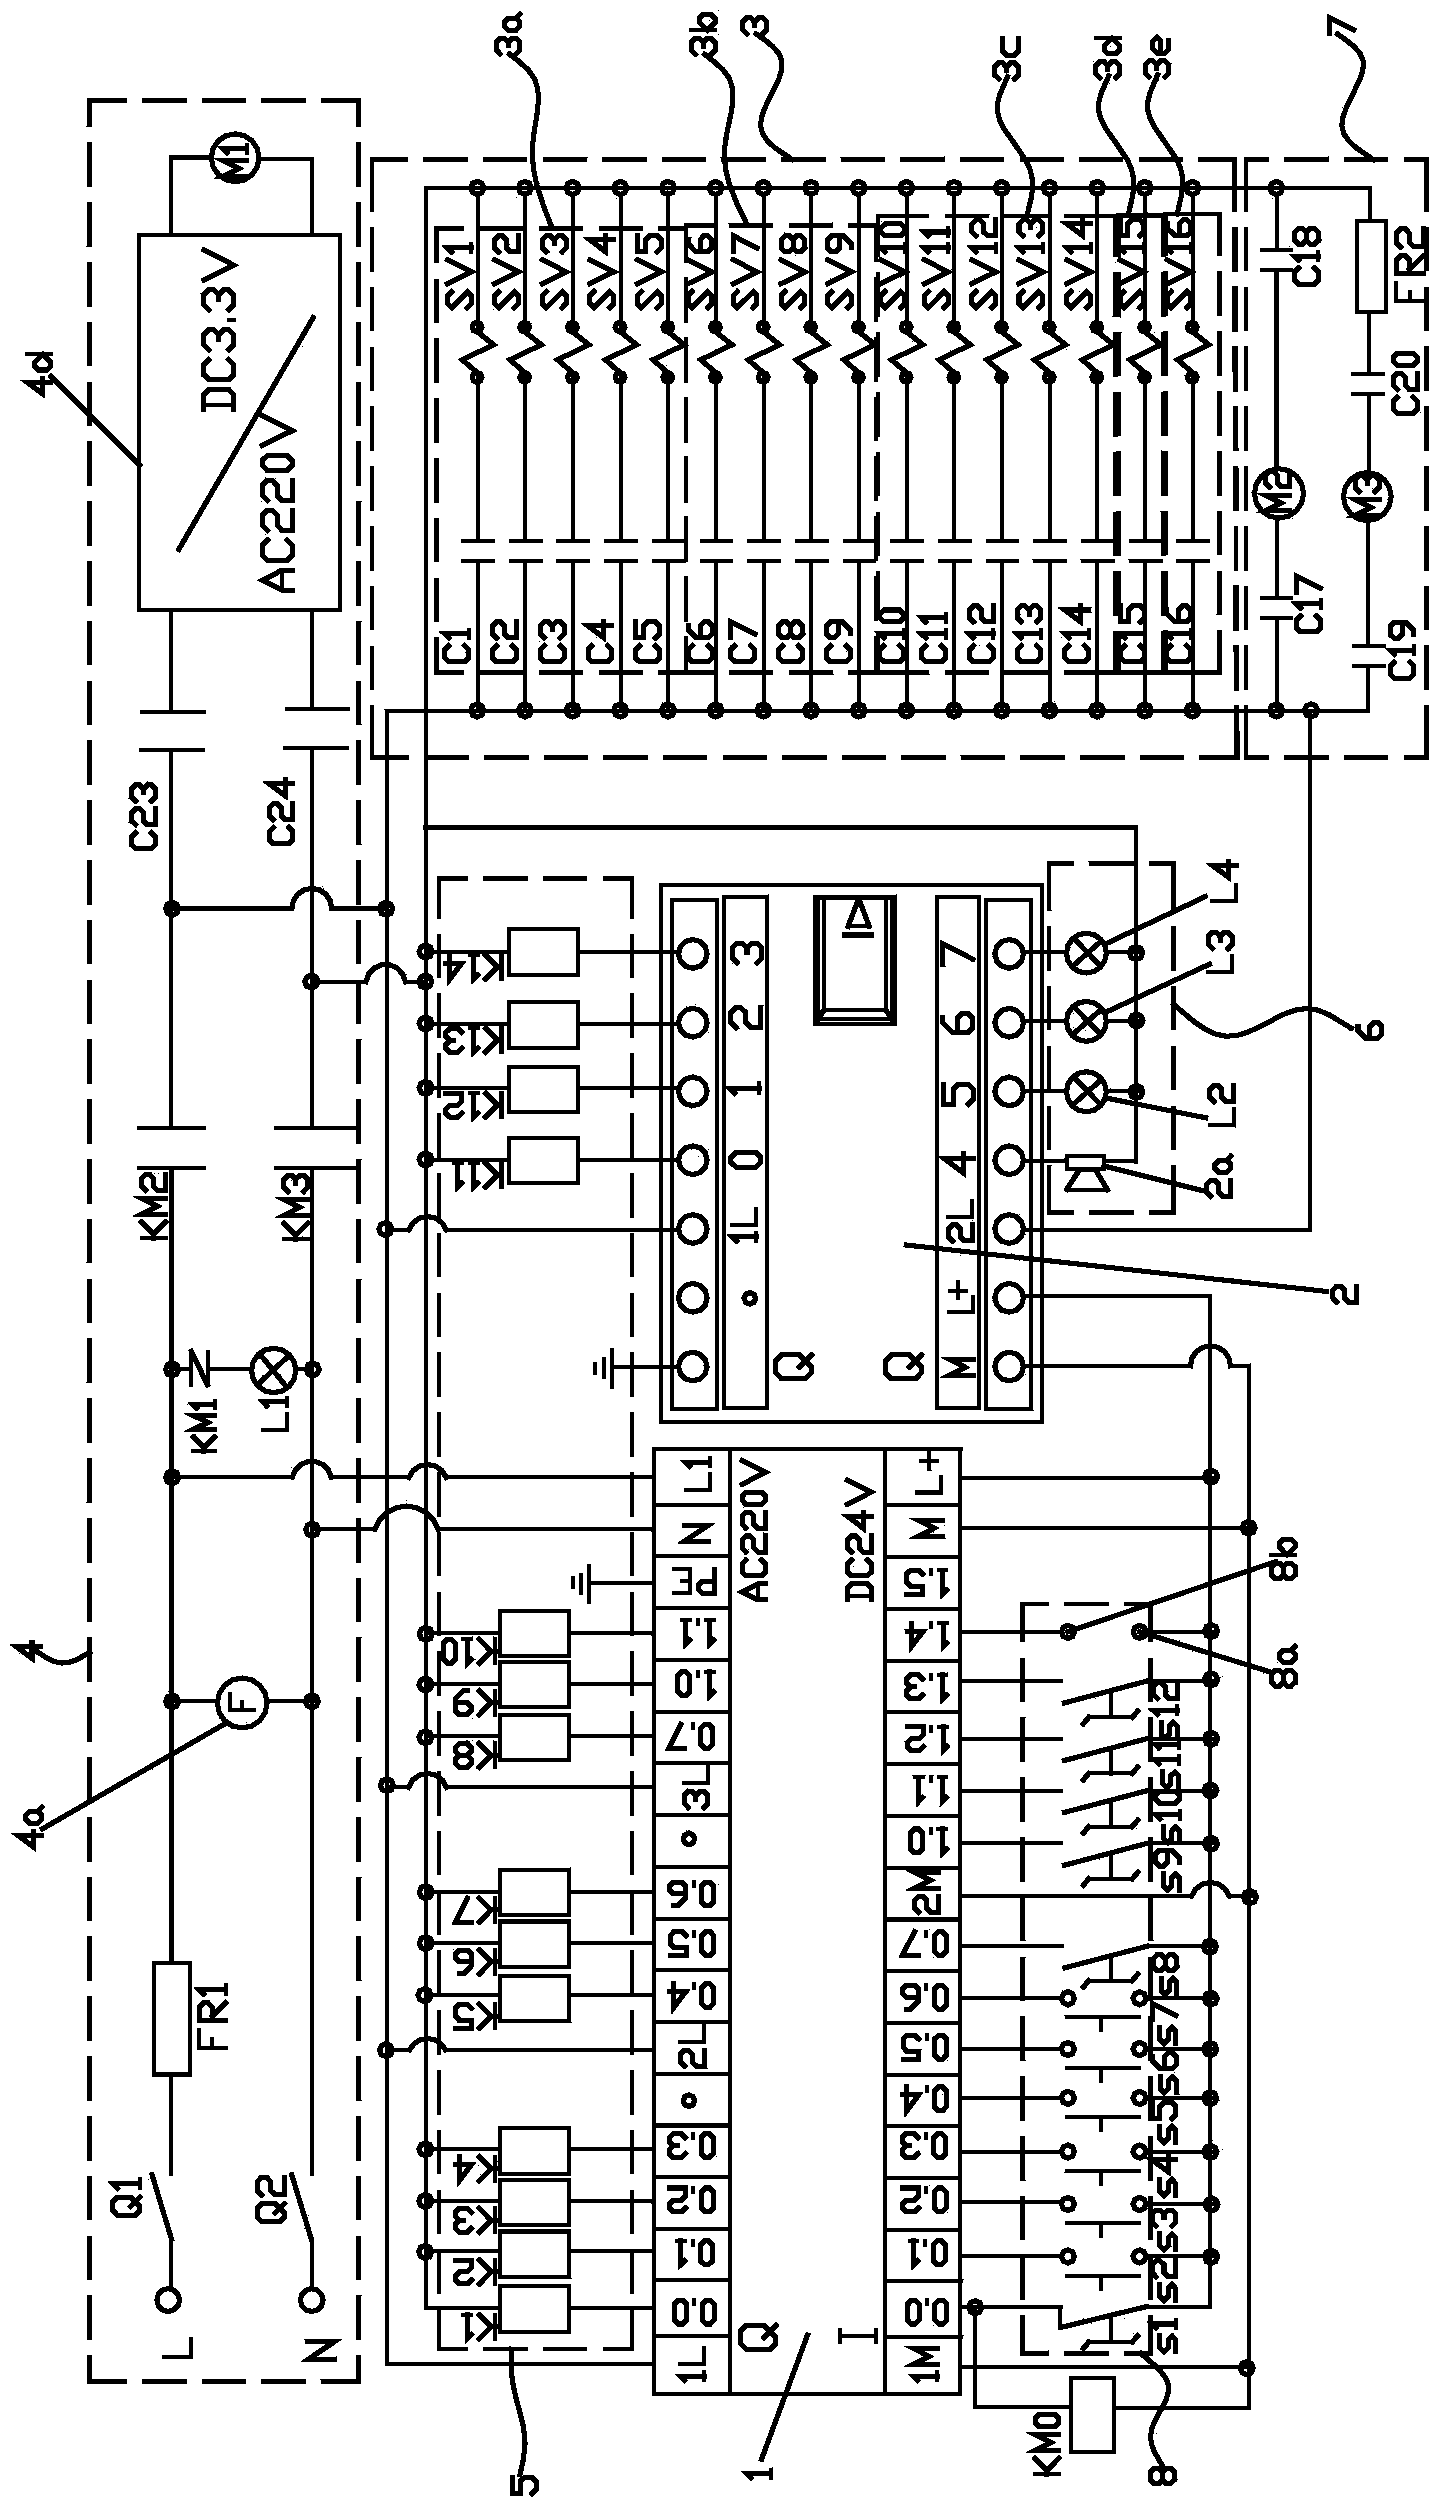 Monitoring circuit of hypersonic flame spraying control system